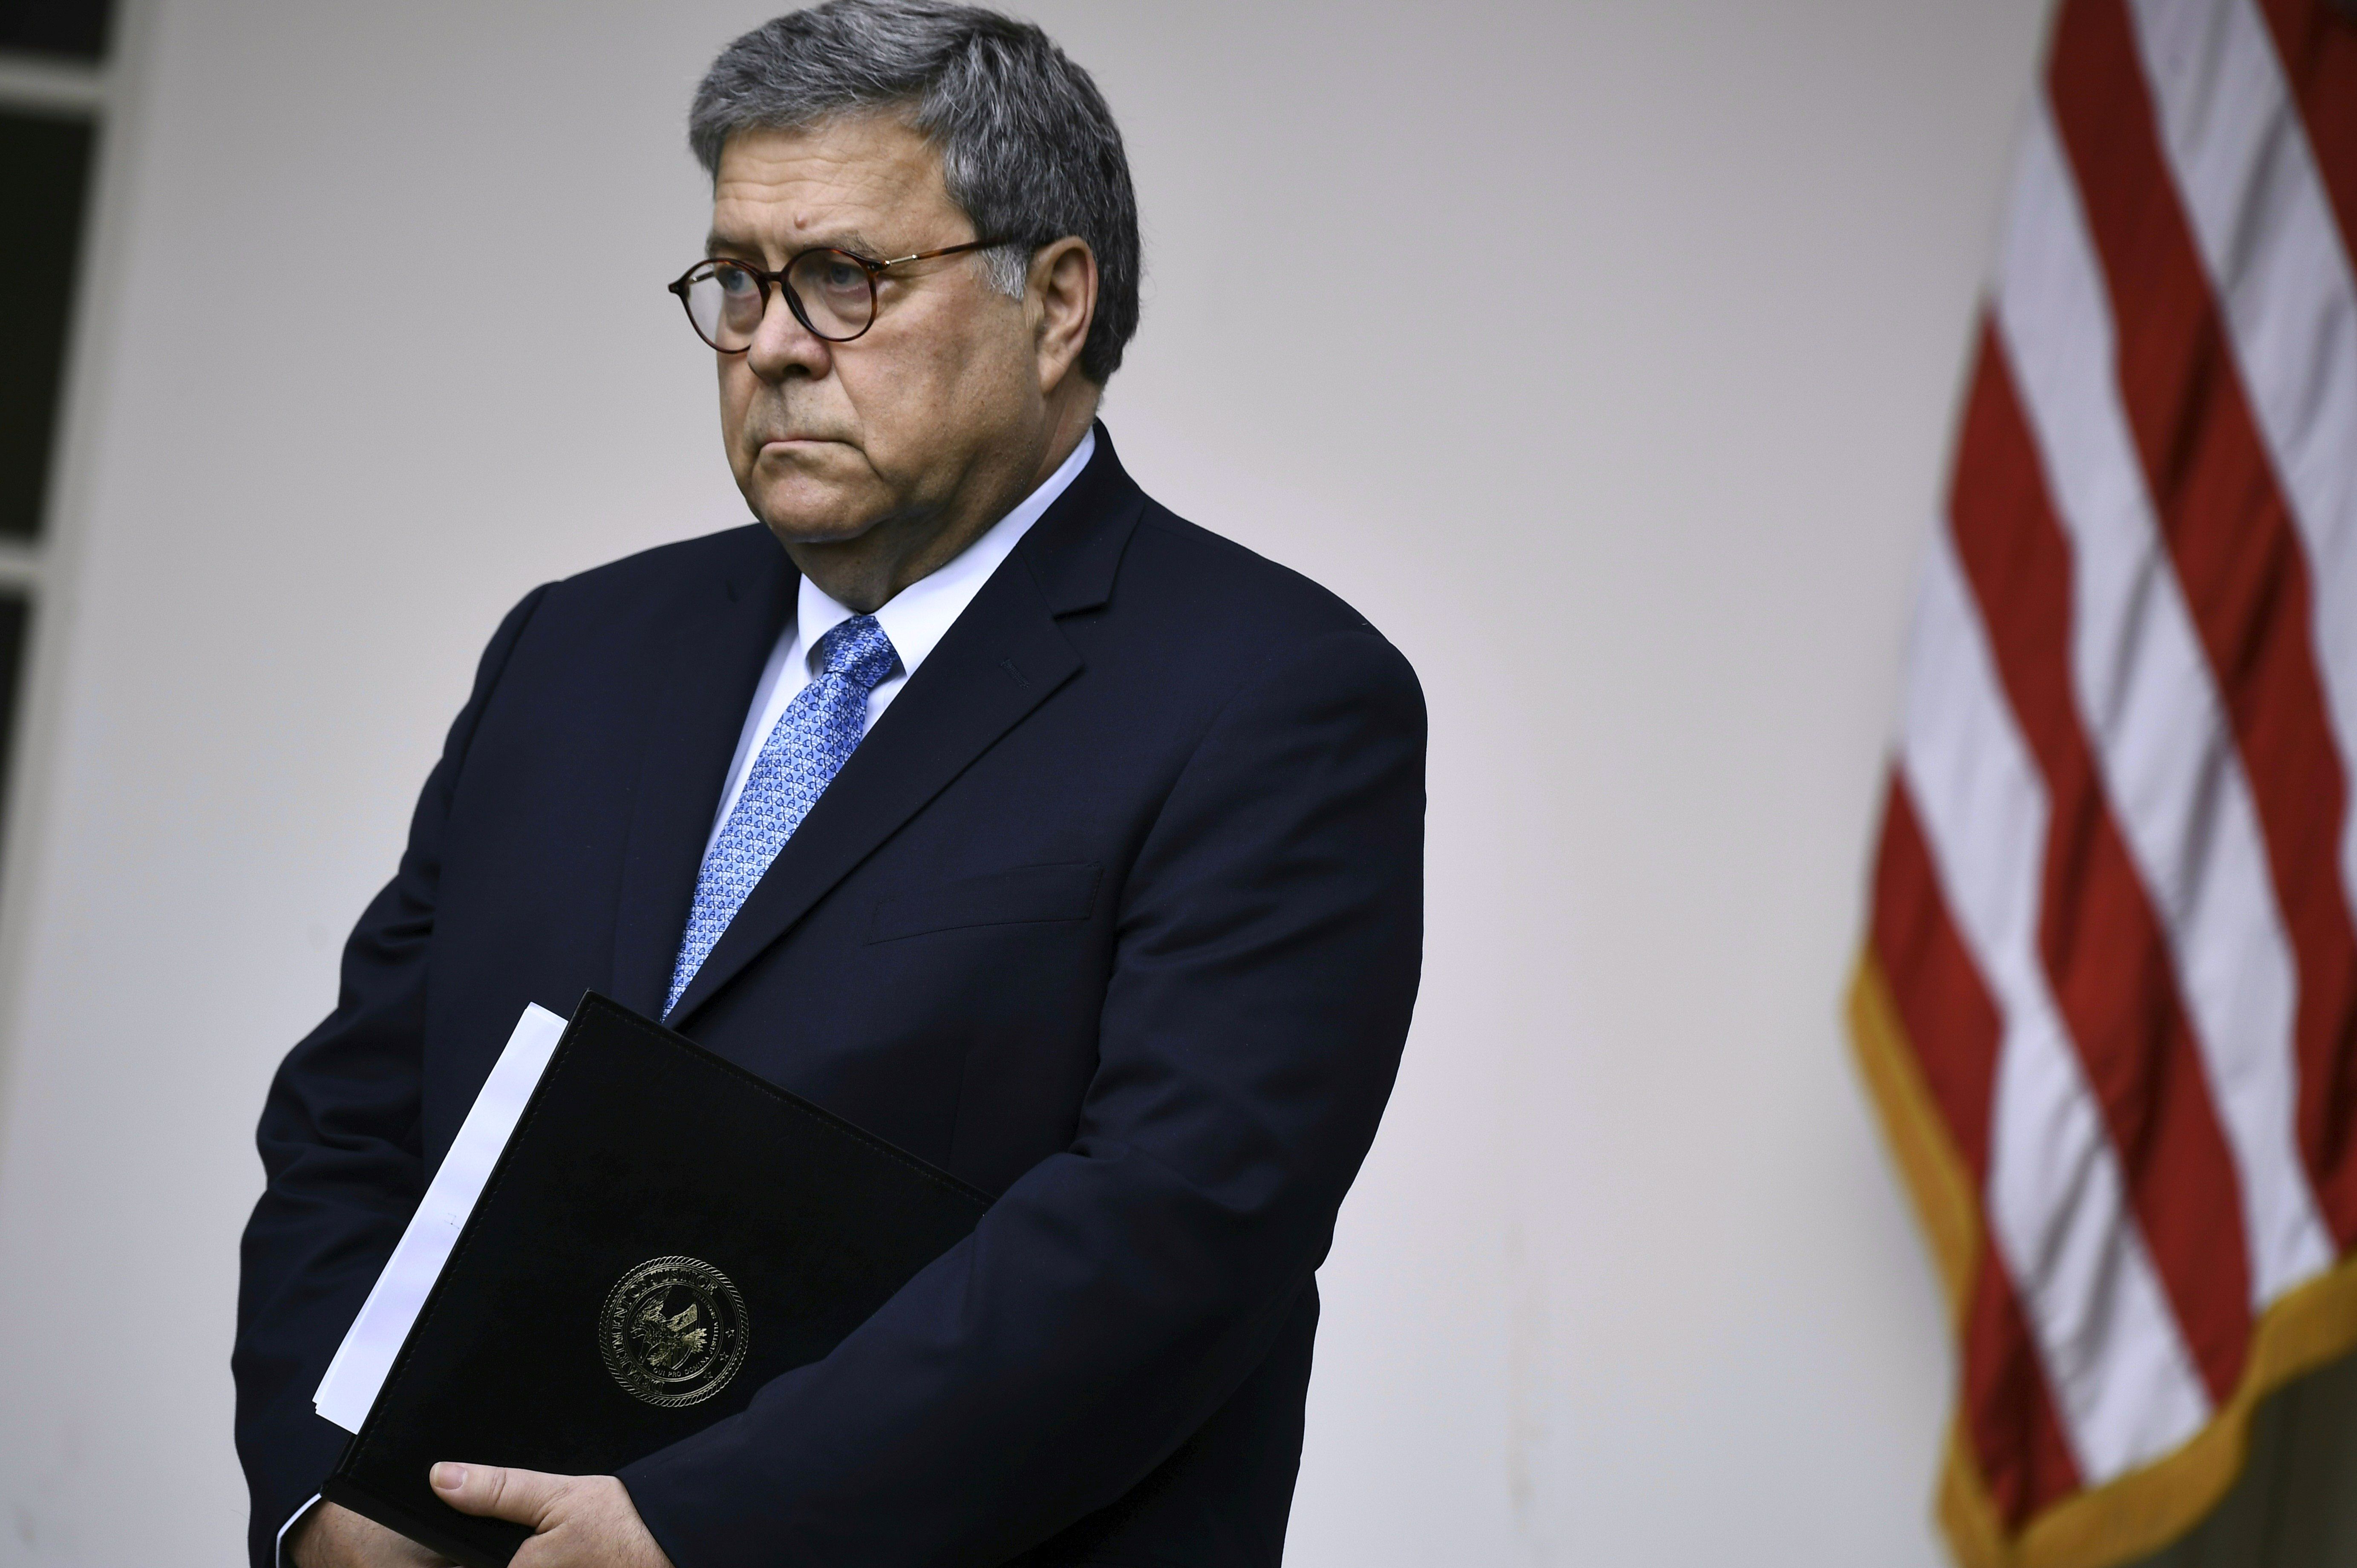 Attorney General William Barr looks on as the president delivers remarks on citizenship and the census on July 11, 2019. (Brendan Smialowski/AFP/Getty Images)